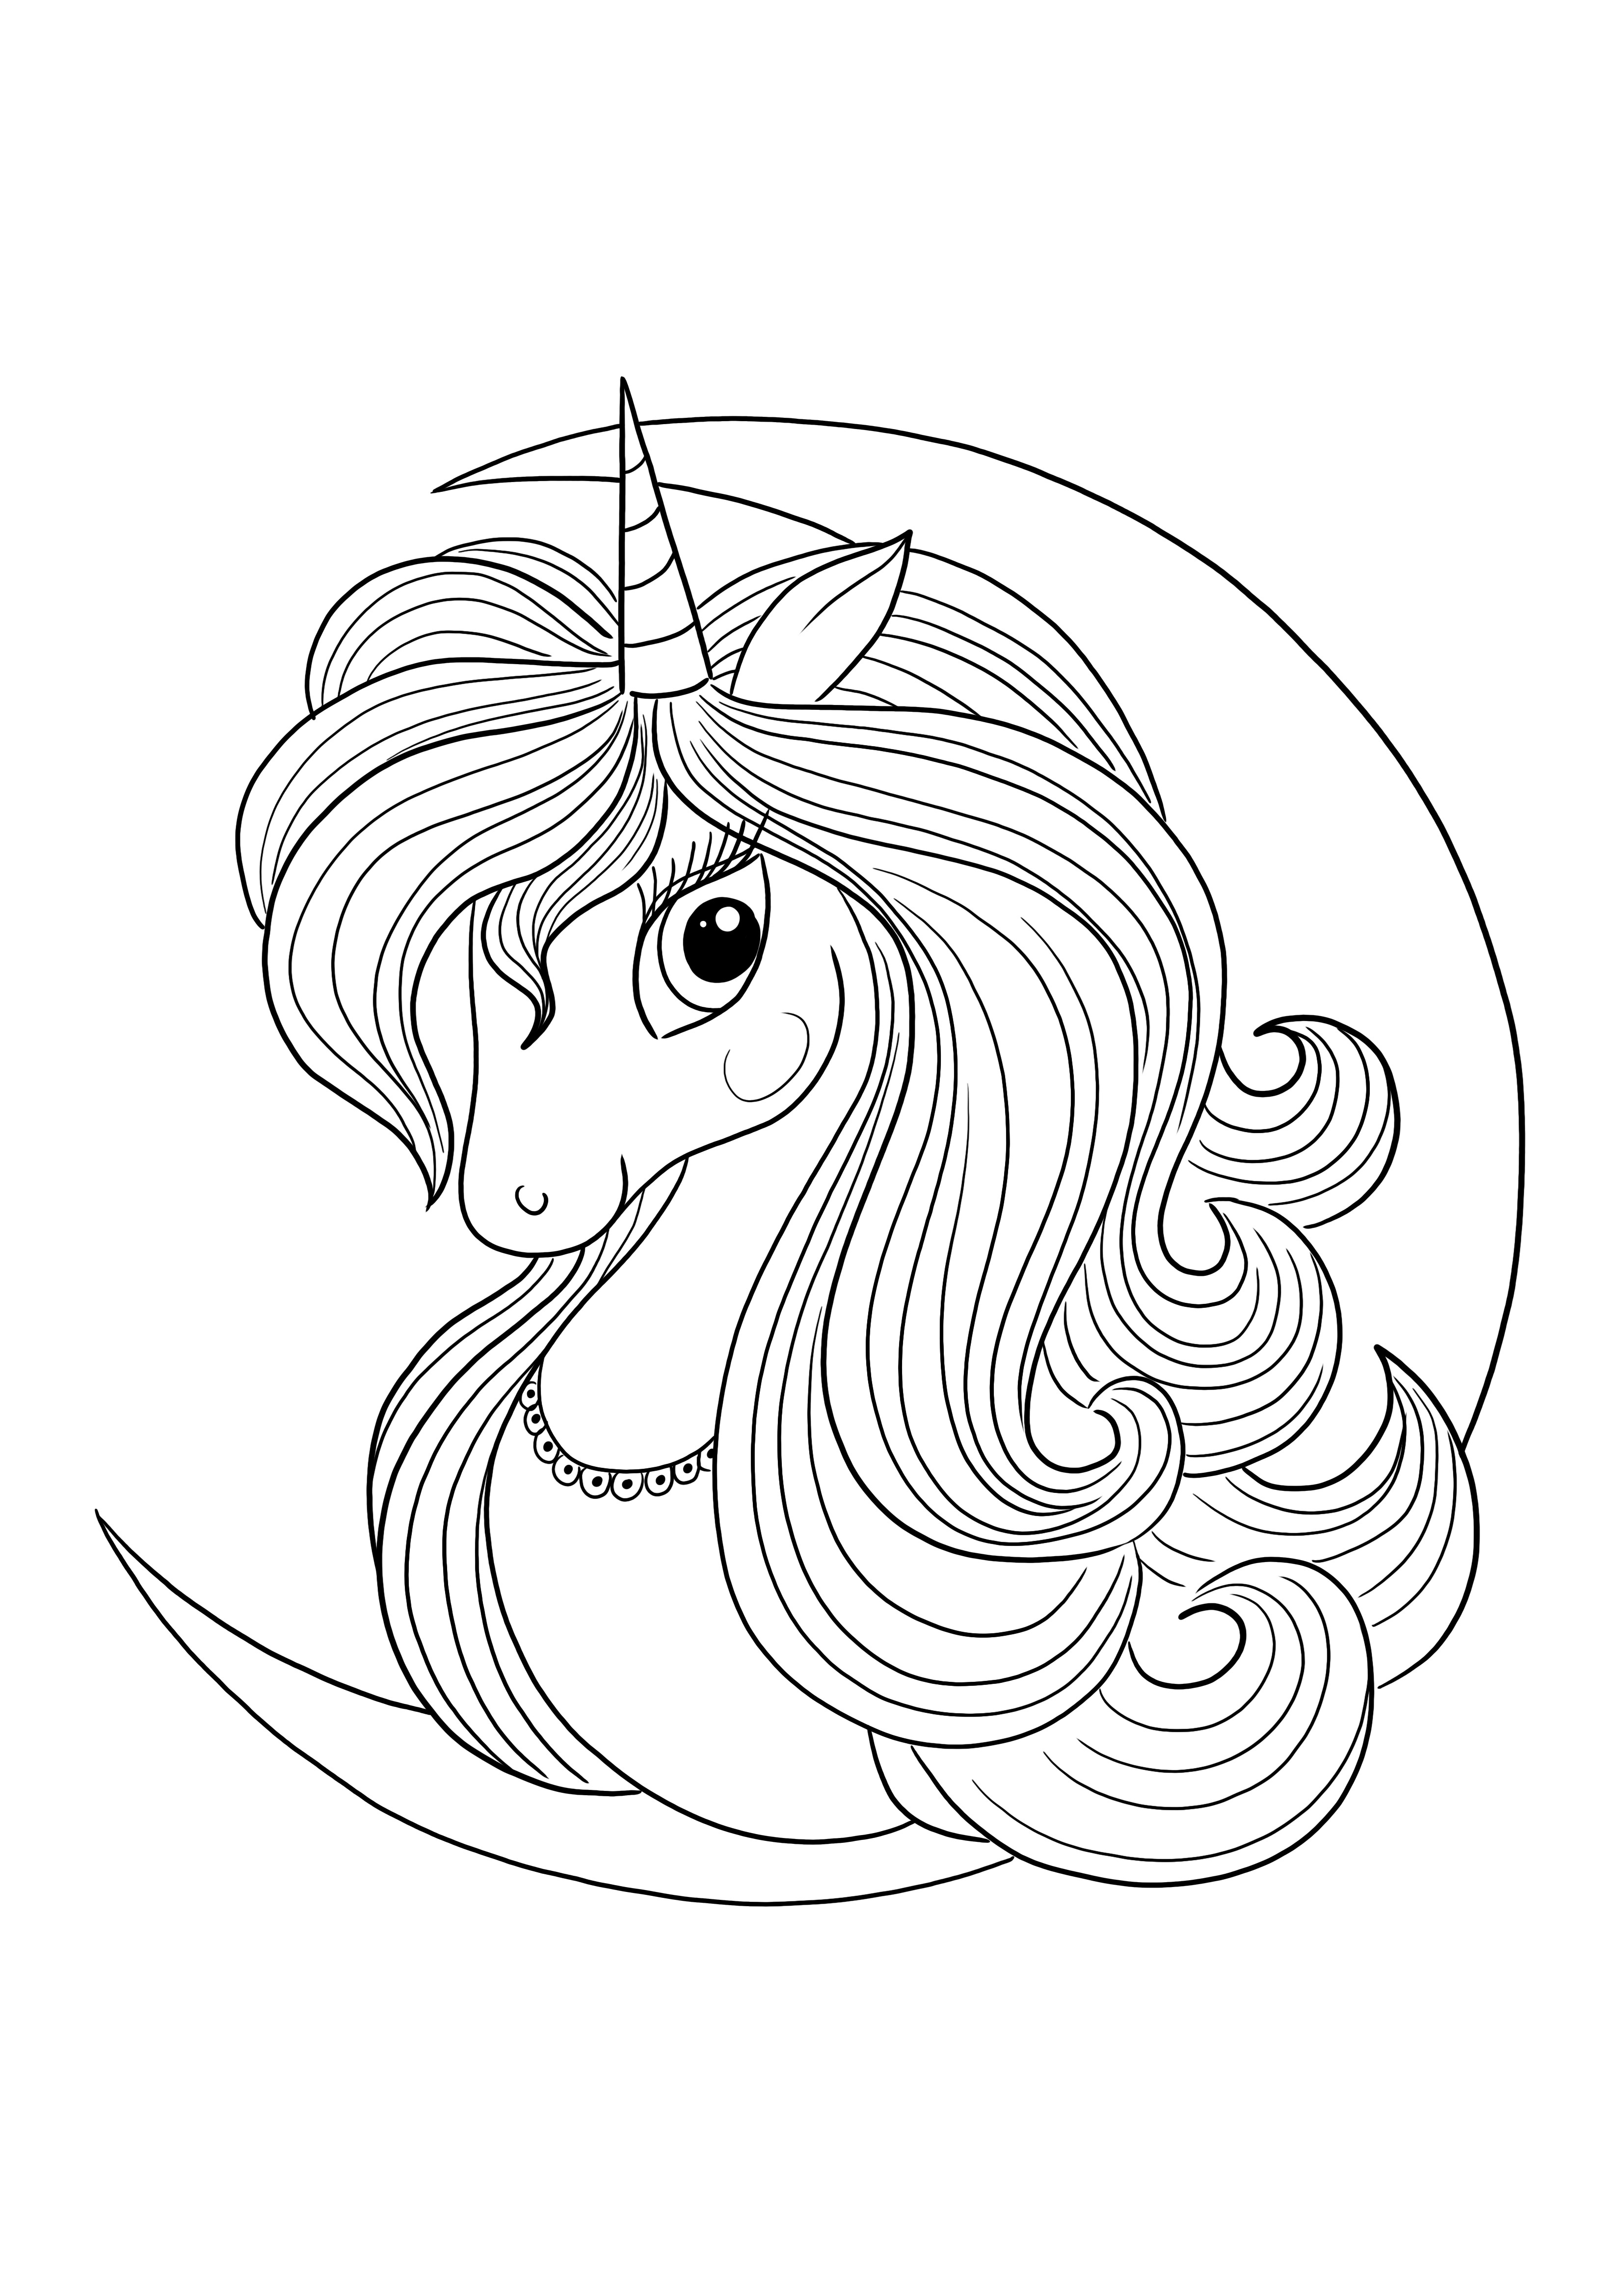 Beautiful Unicorn on moon-to download for free and color easily